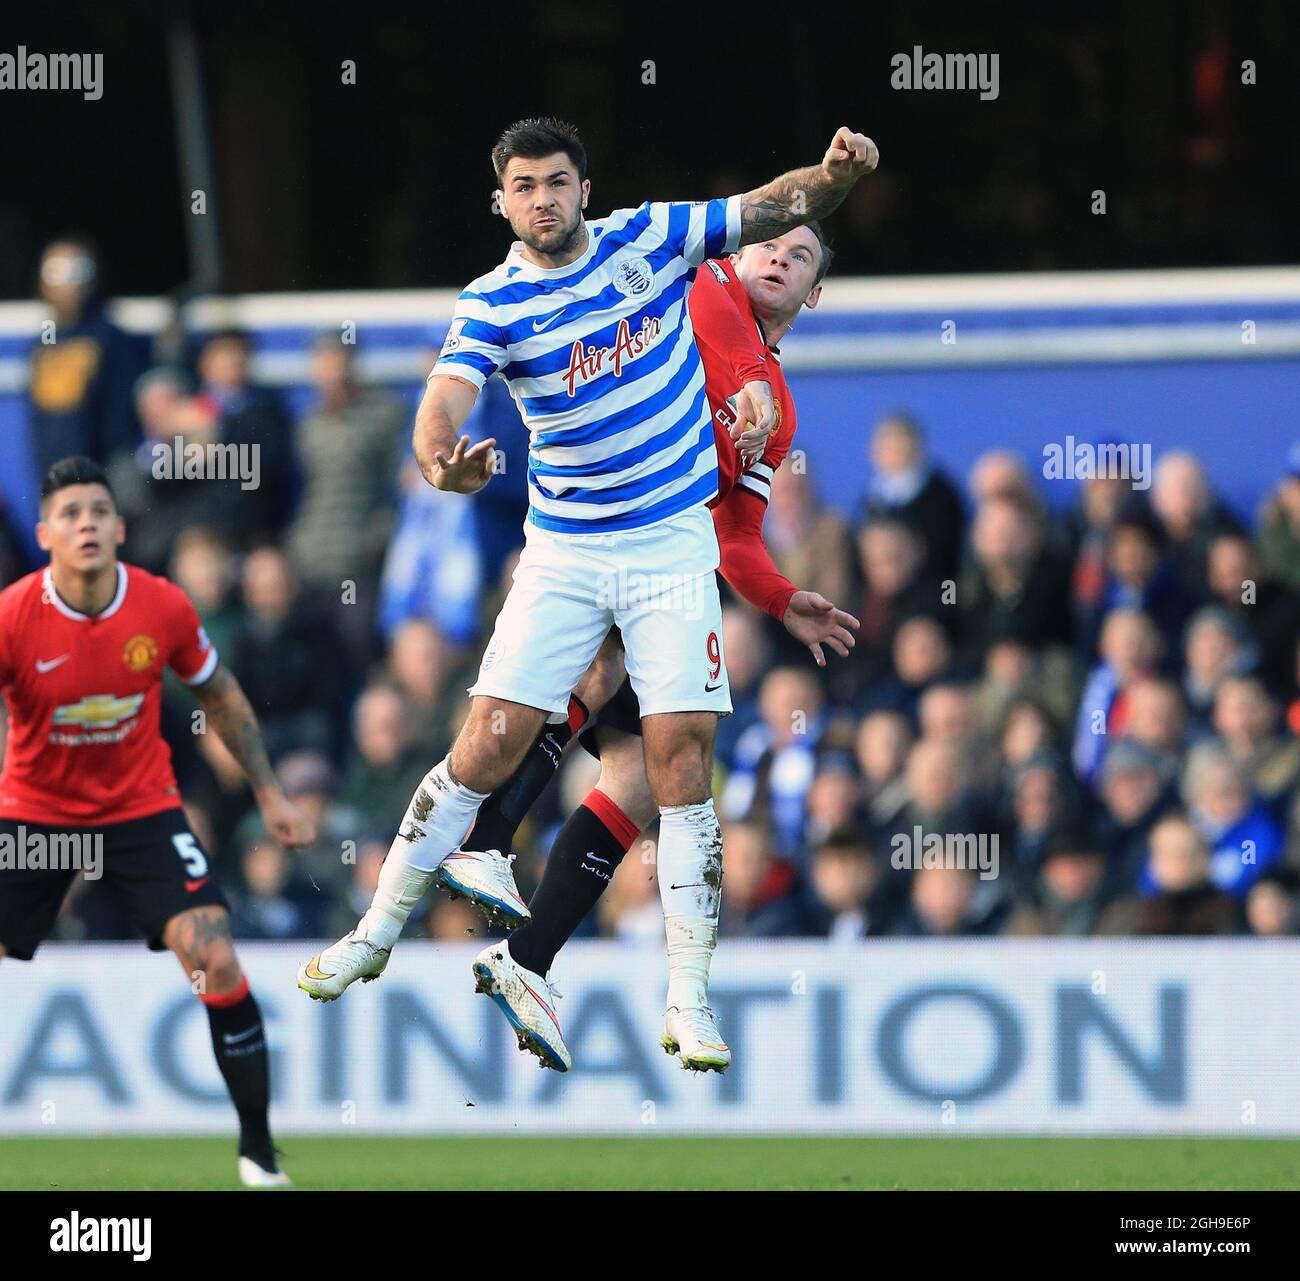 QPR's Charlie Austin tussles with Manchester United's Wayne Rooney during the Barclays Premier League match between Queens Park Rangers and Manchester United at Loftus Road, London on January 17, 2015. Stock Photo